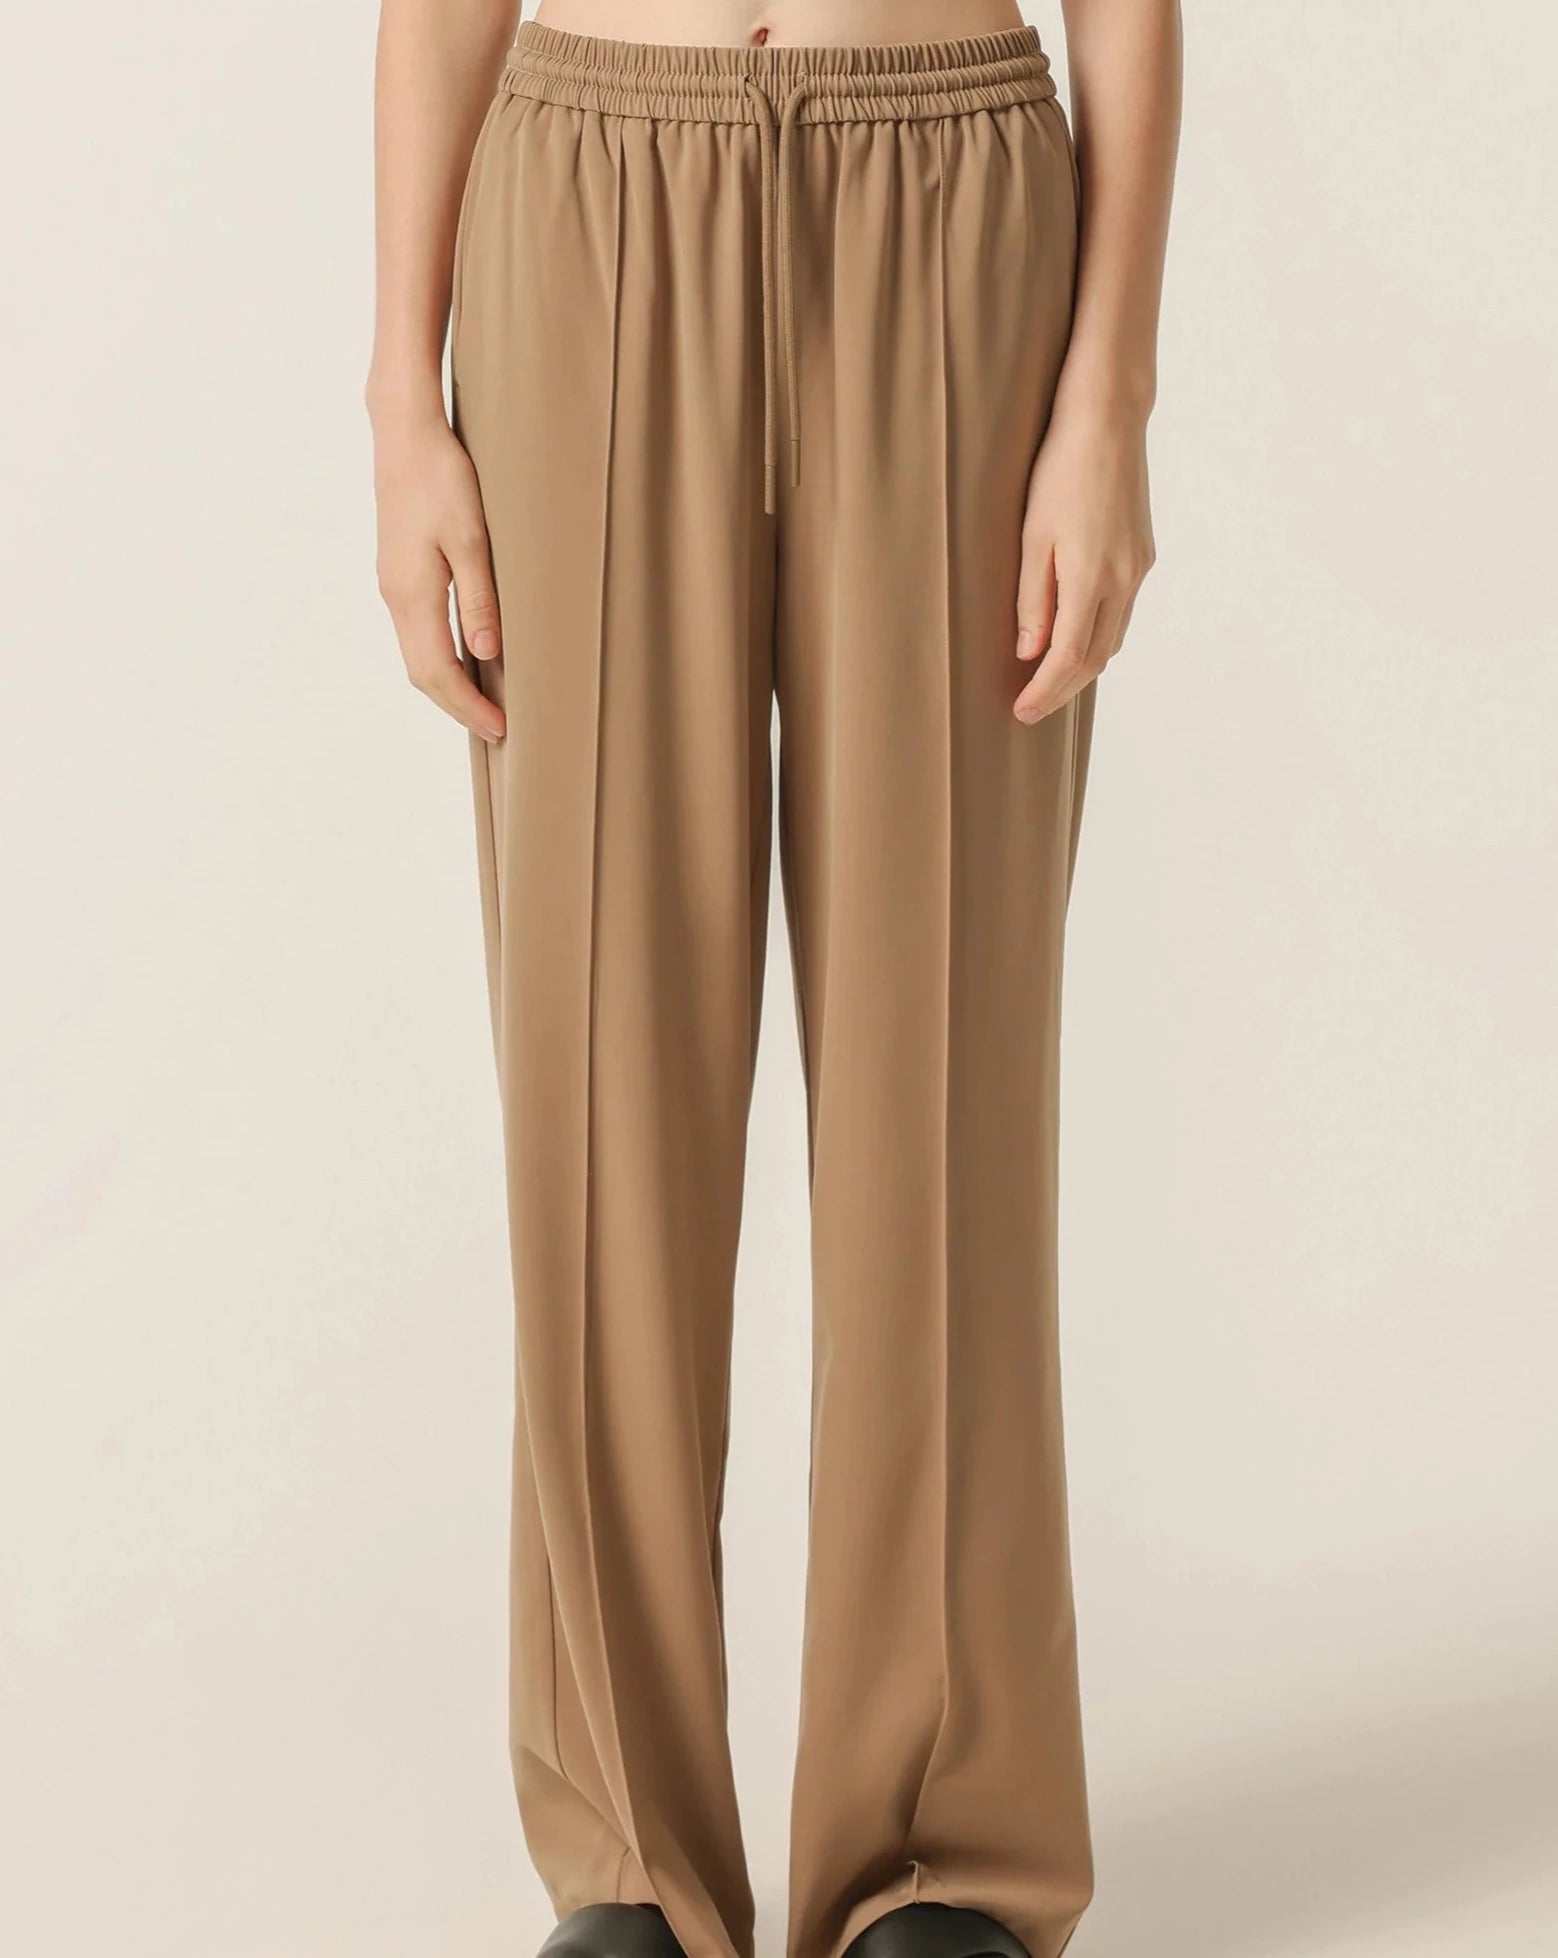 NUDE LUCY Melrose Pant - SEPIA